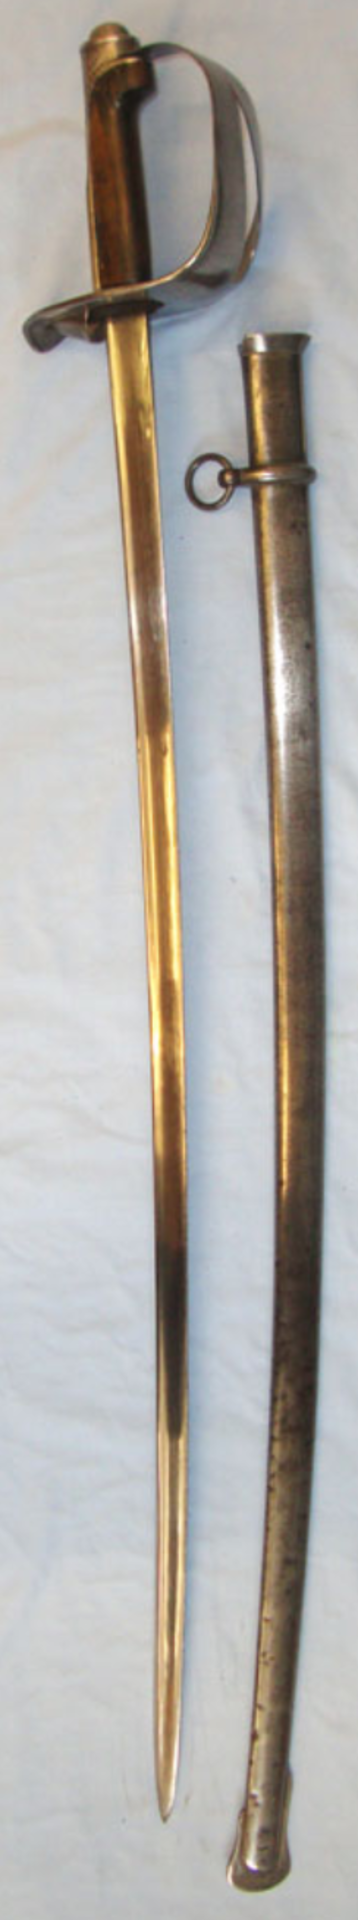 WW1 Italian Model 1871/ 1909 Cavalry Trooper's Sword With Pipe Back Blade & Scabbard - Image 2 of 3